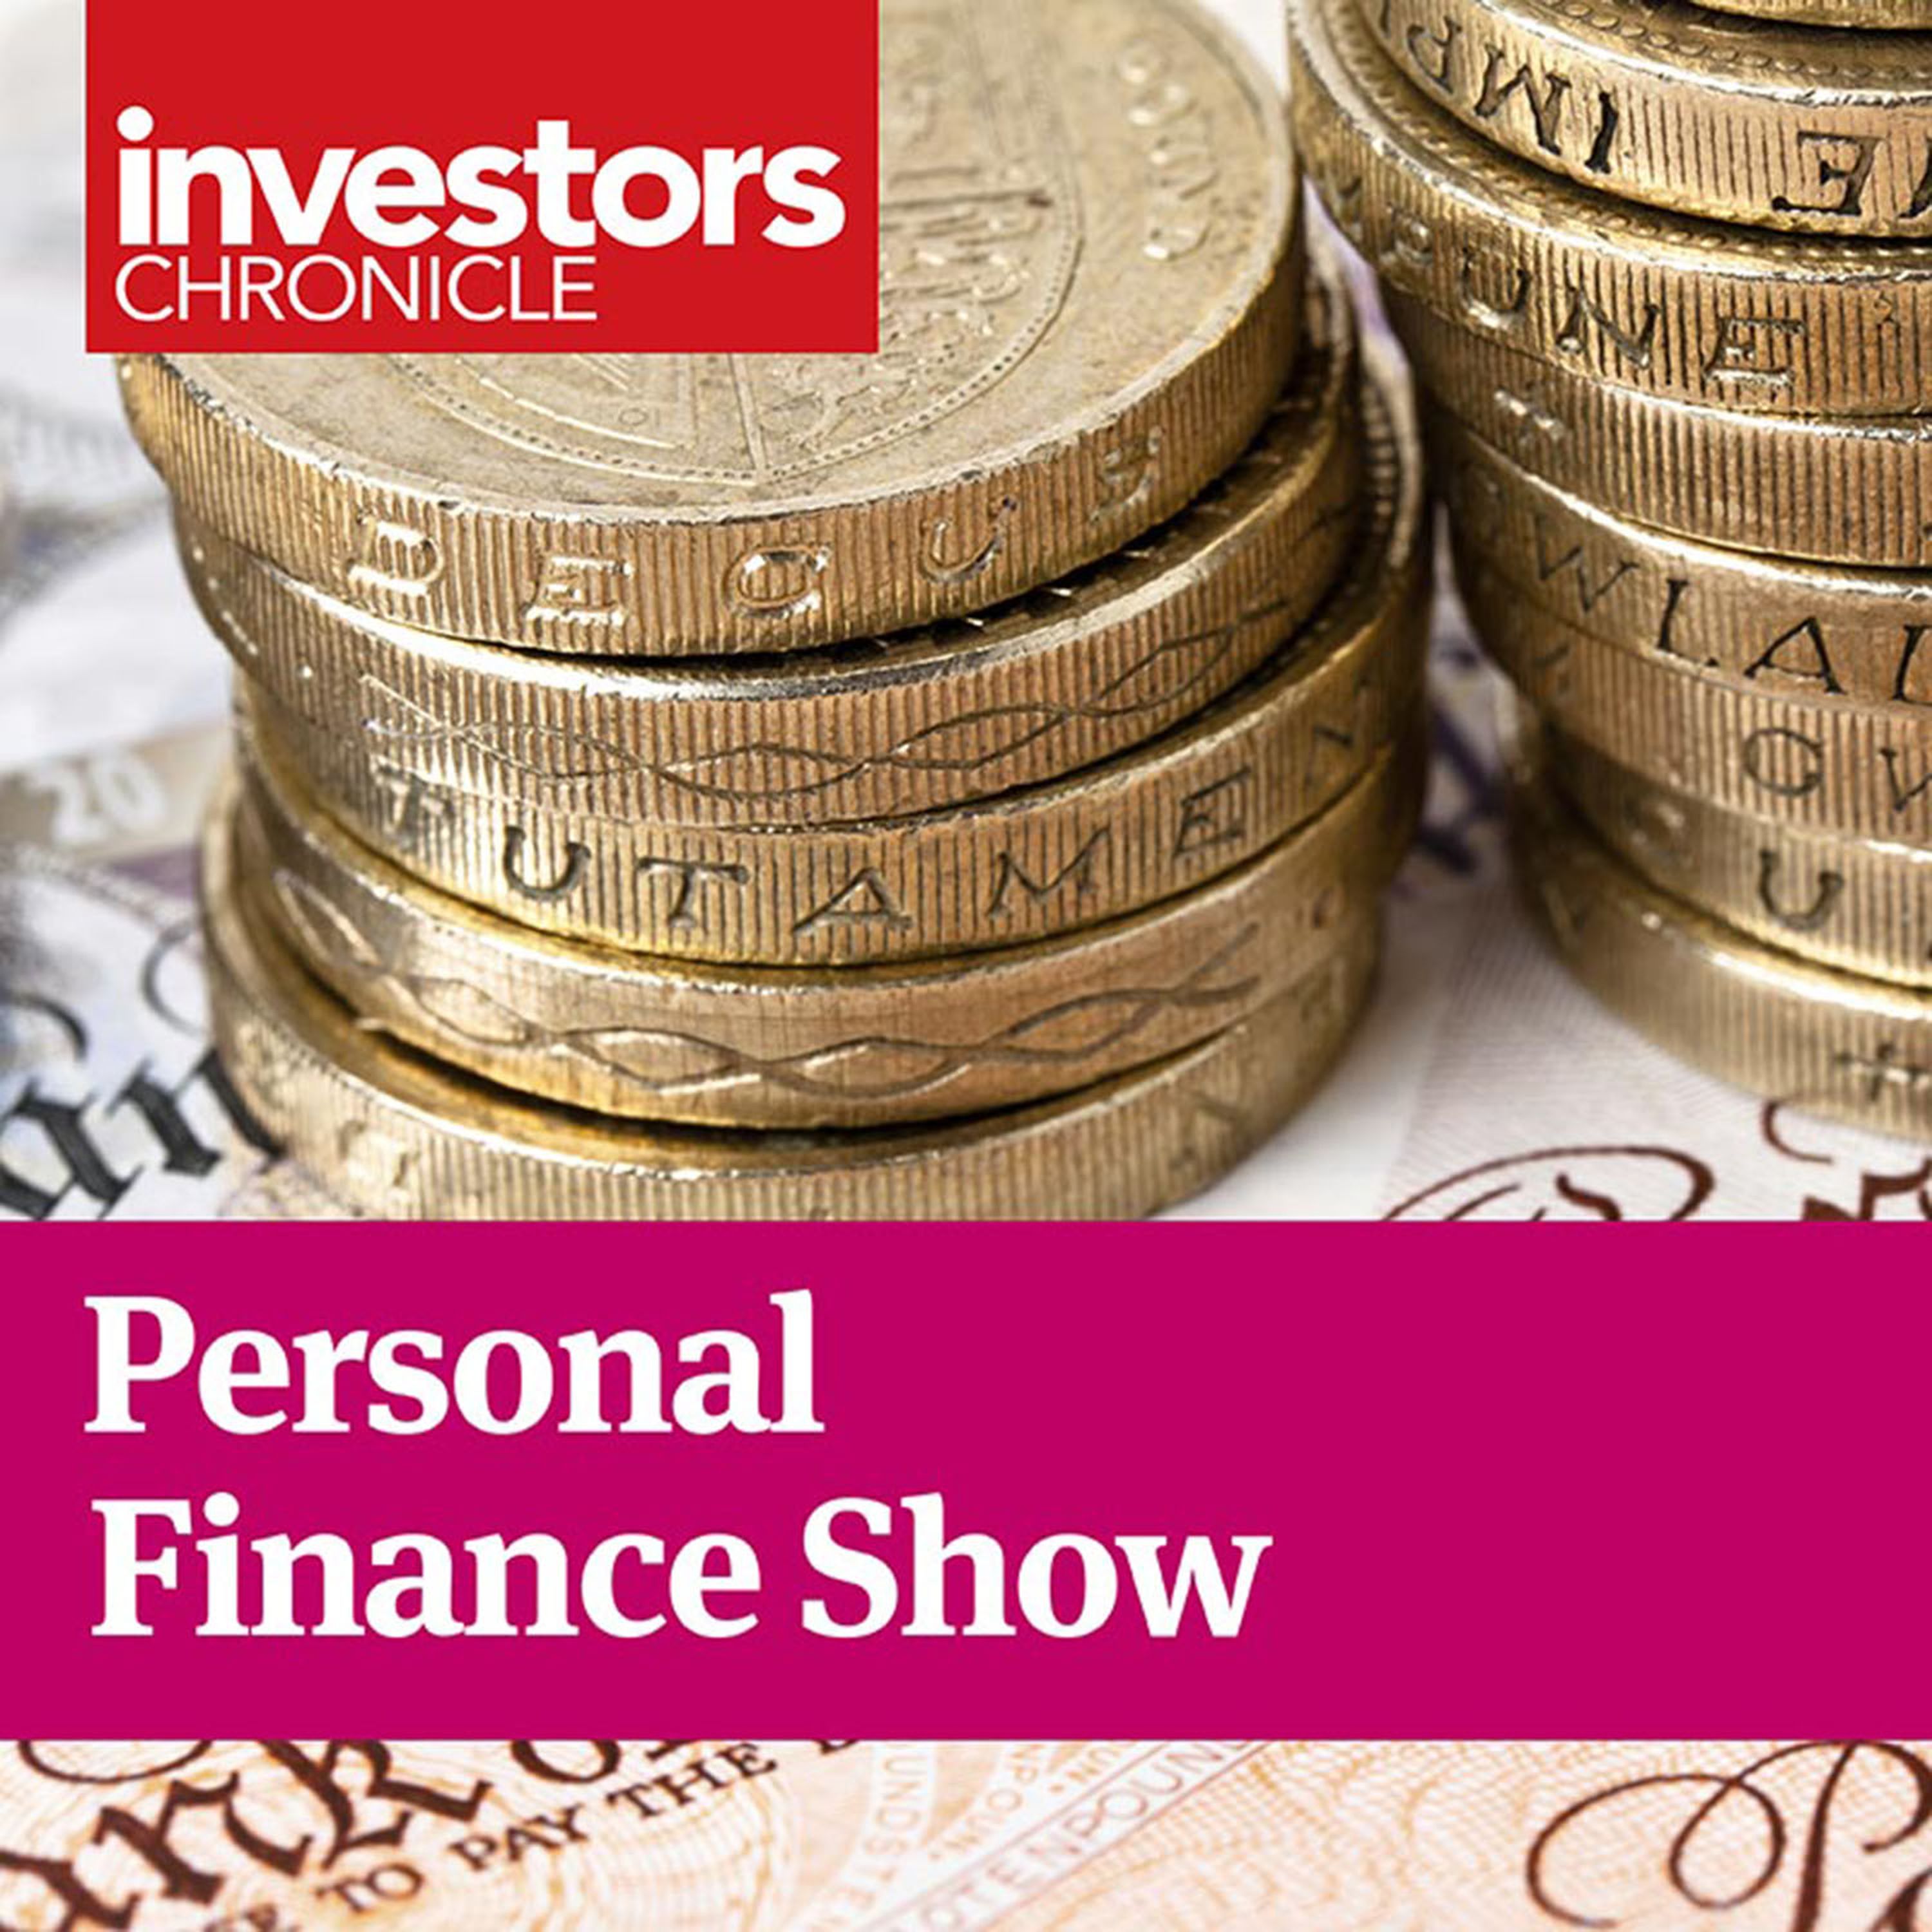 Personal Finance Show: Finding the best fixed income and when to sell a champion